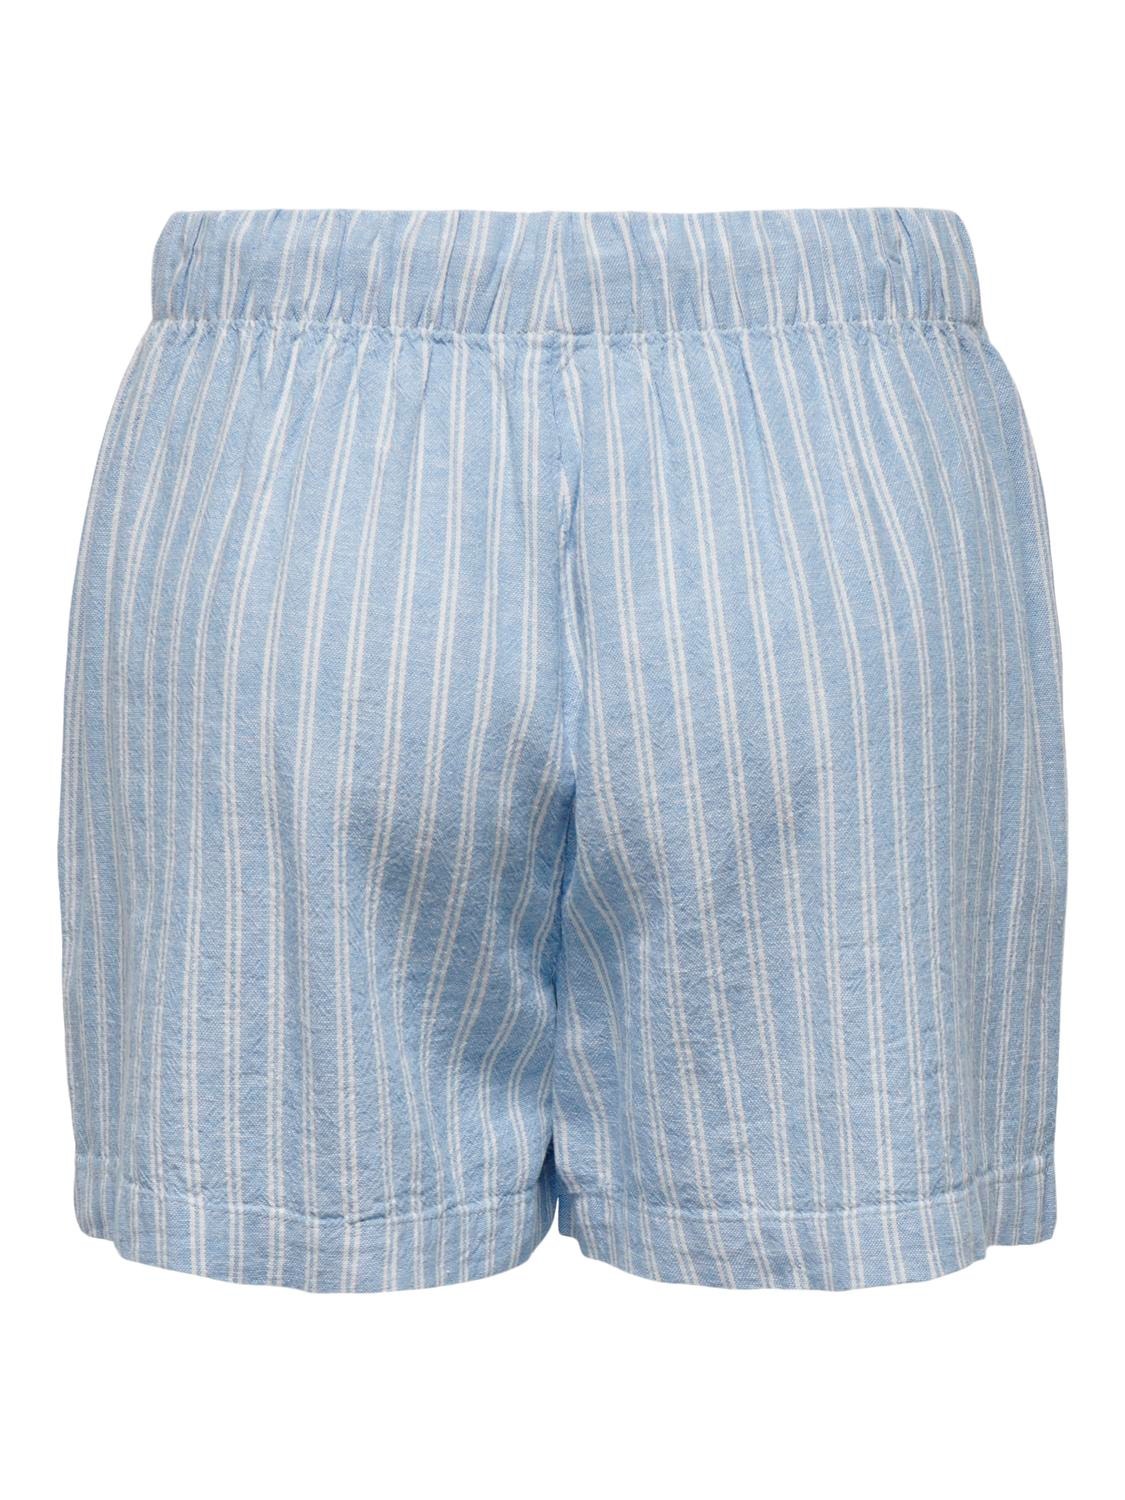 ONLY Shorts with mid waist -Blissful Blue - 15314055